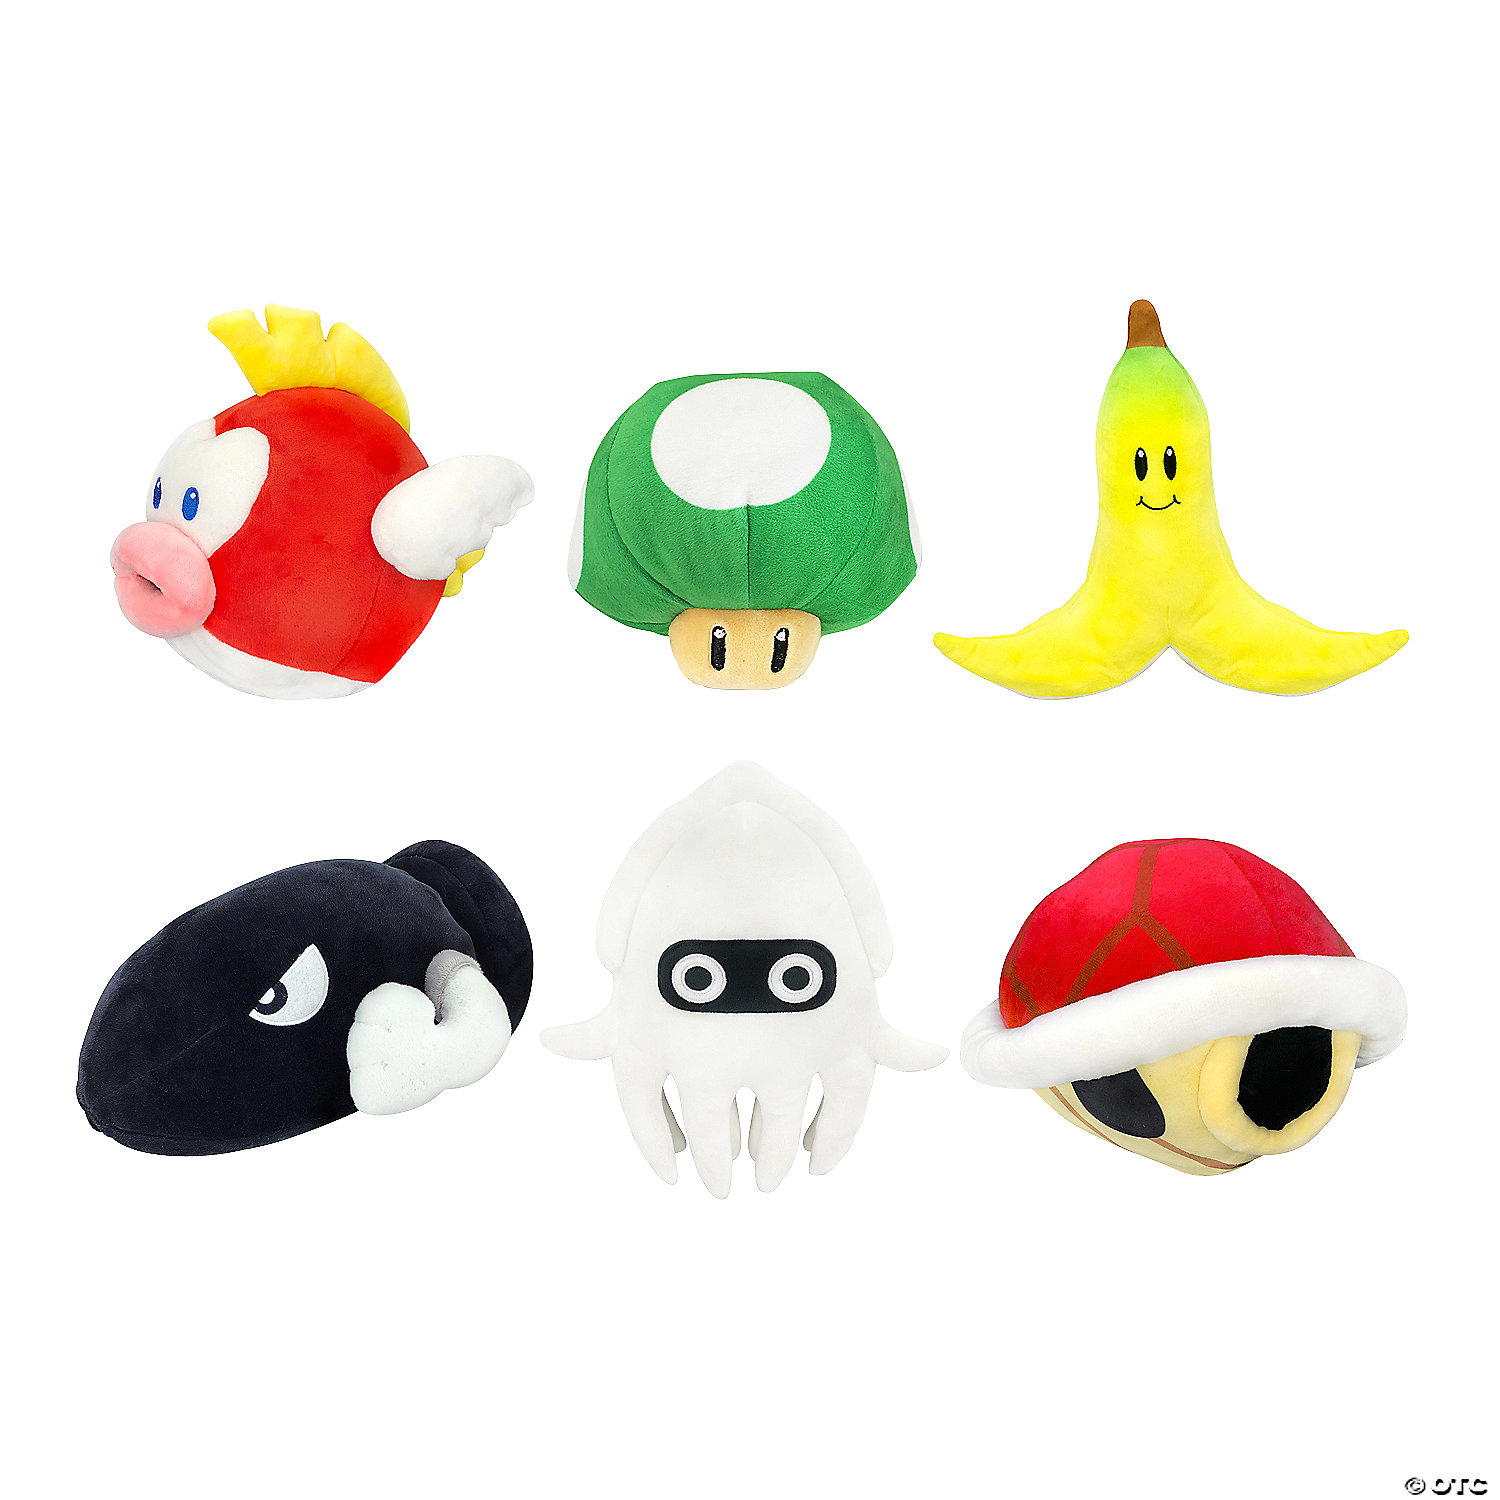 Super Mario Squishies Blind Bag Review –